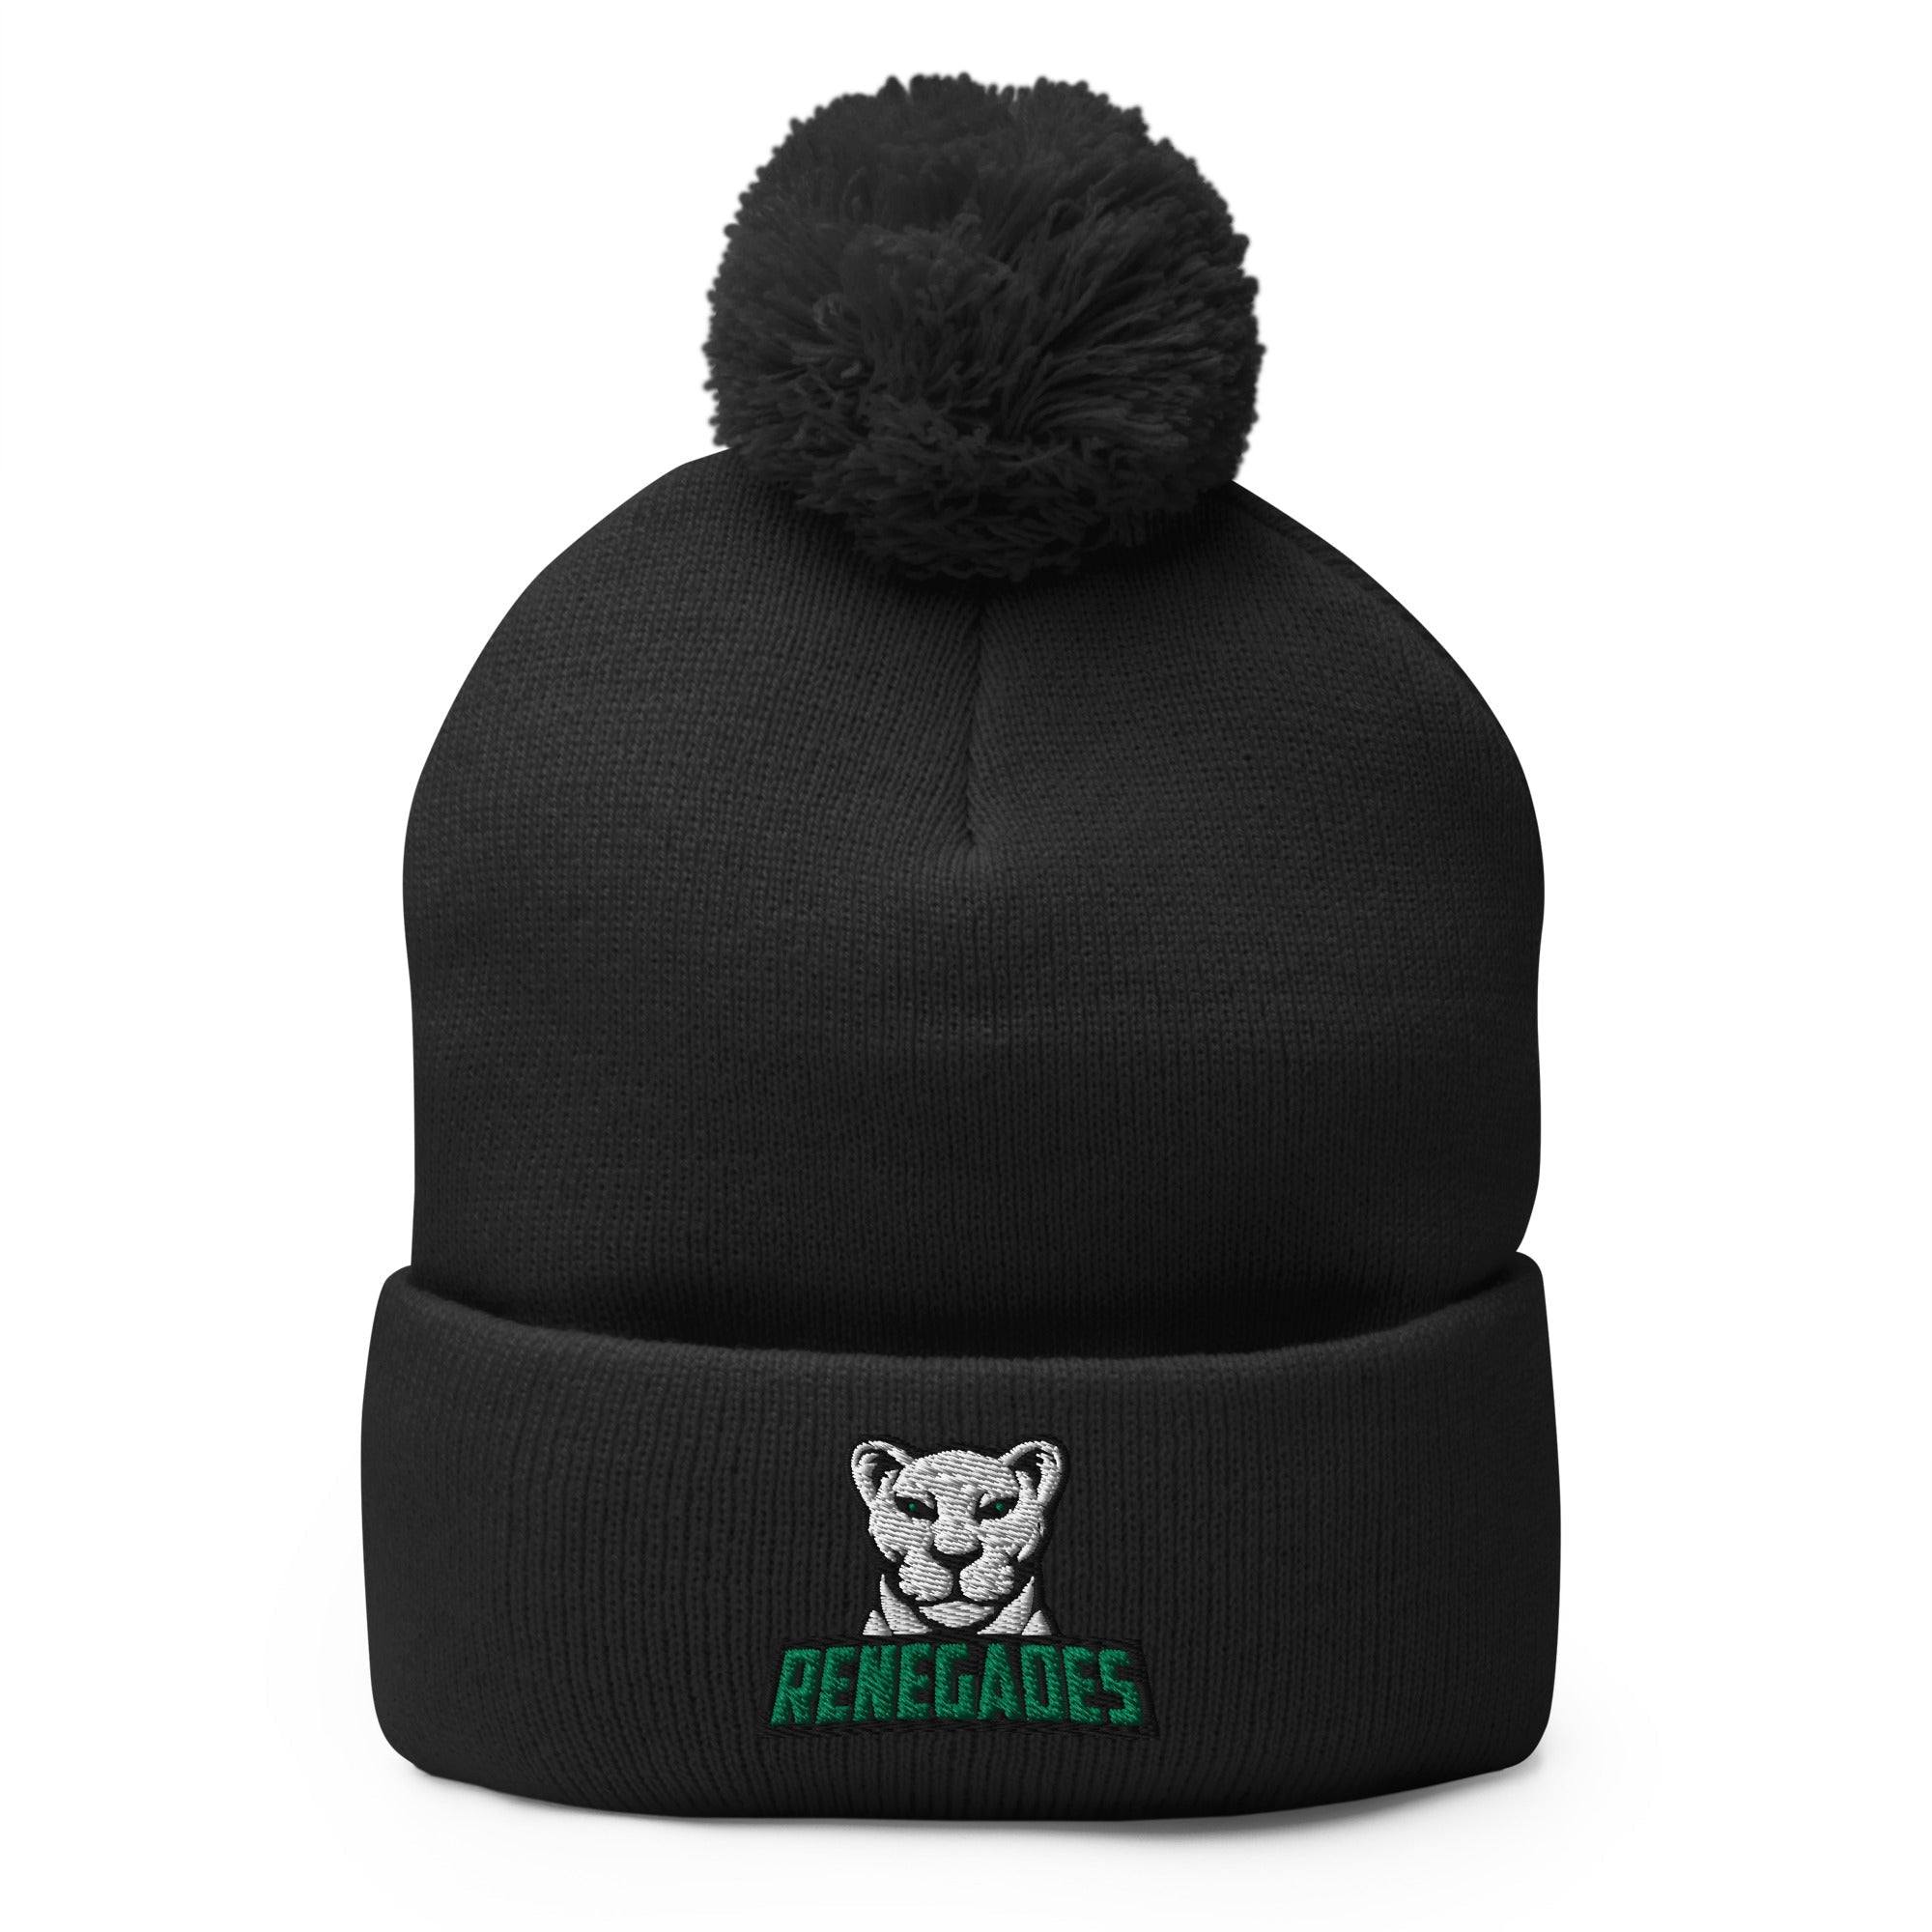 Rugby Imports Renegades Pom Beanie